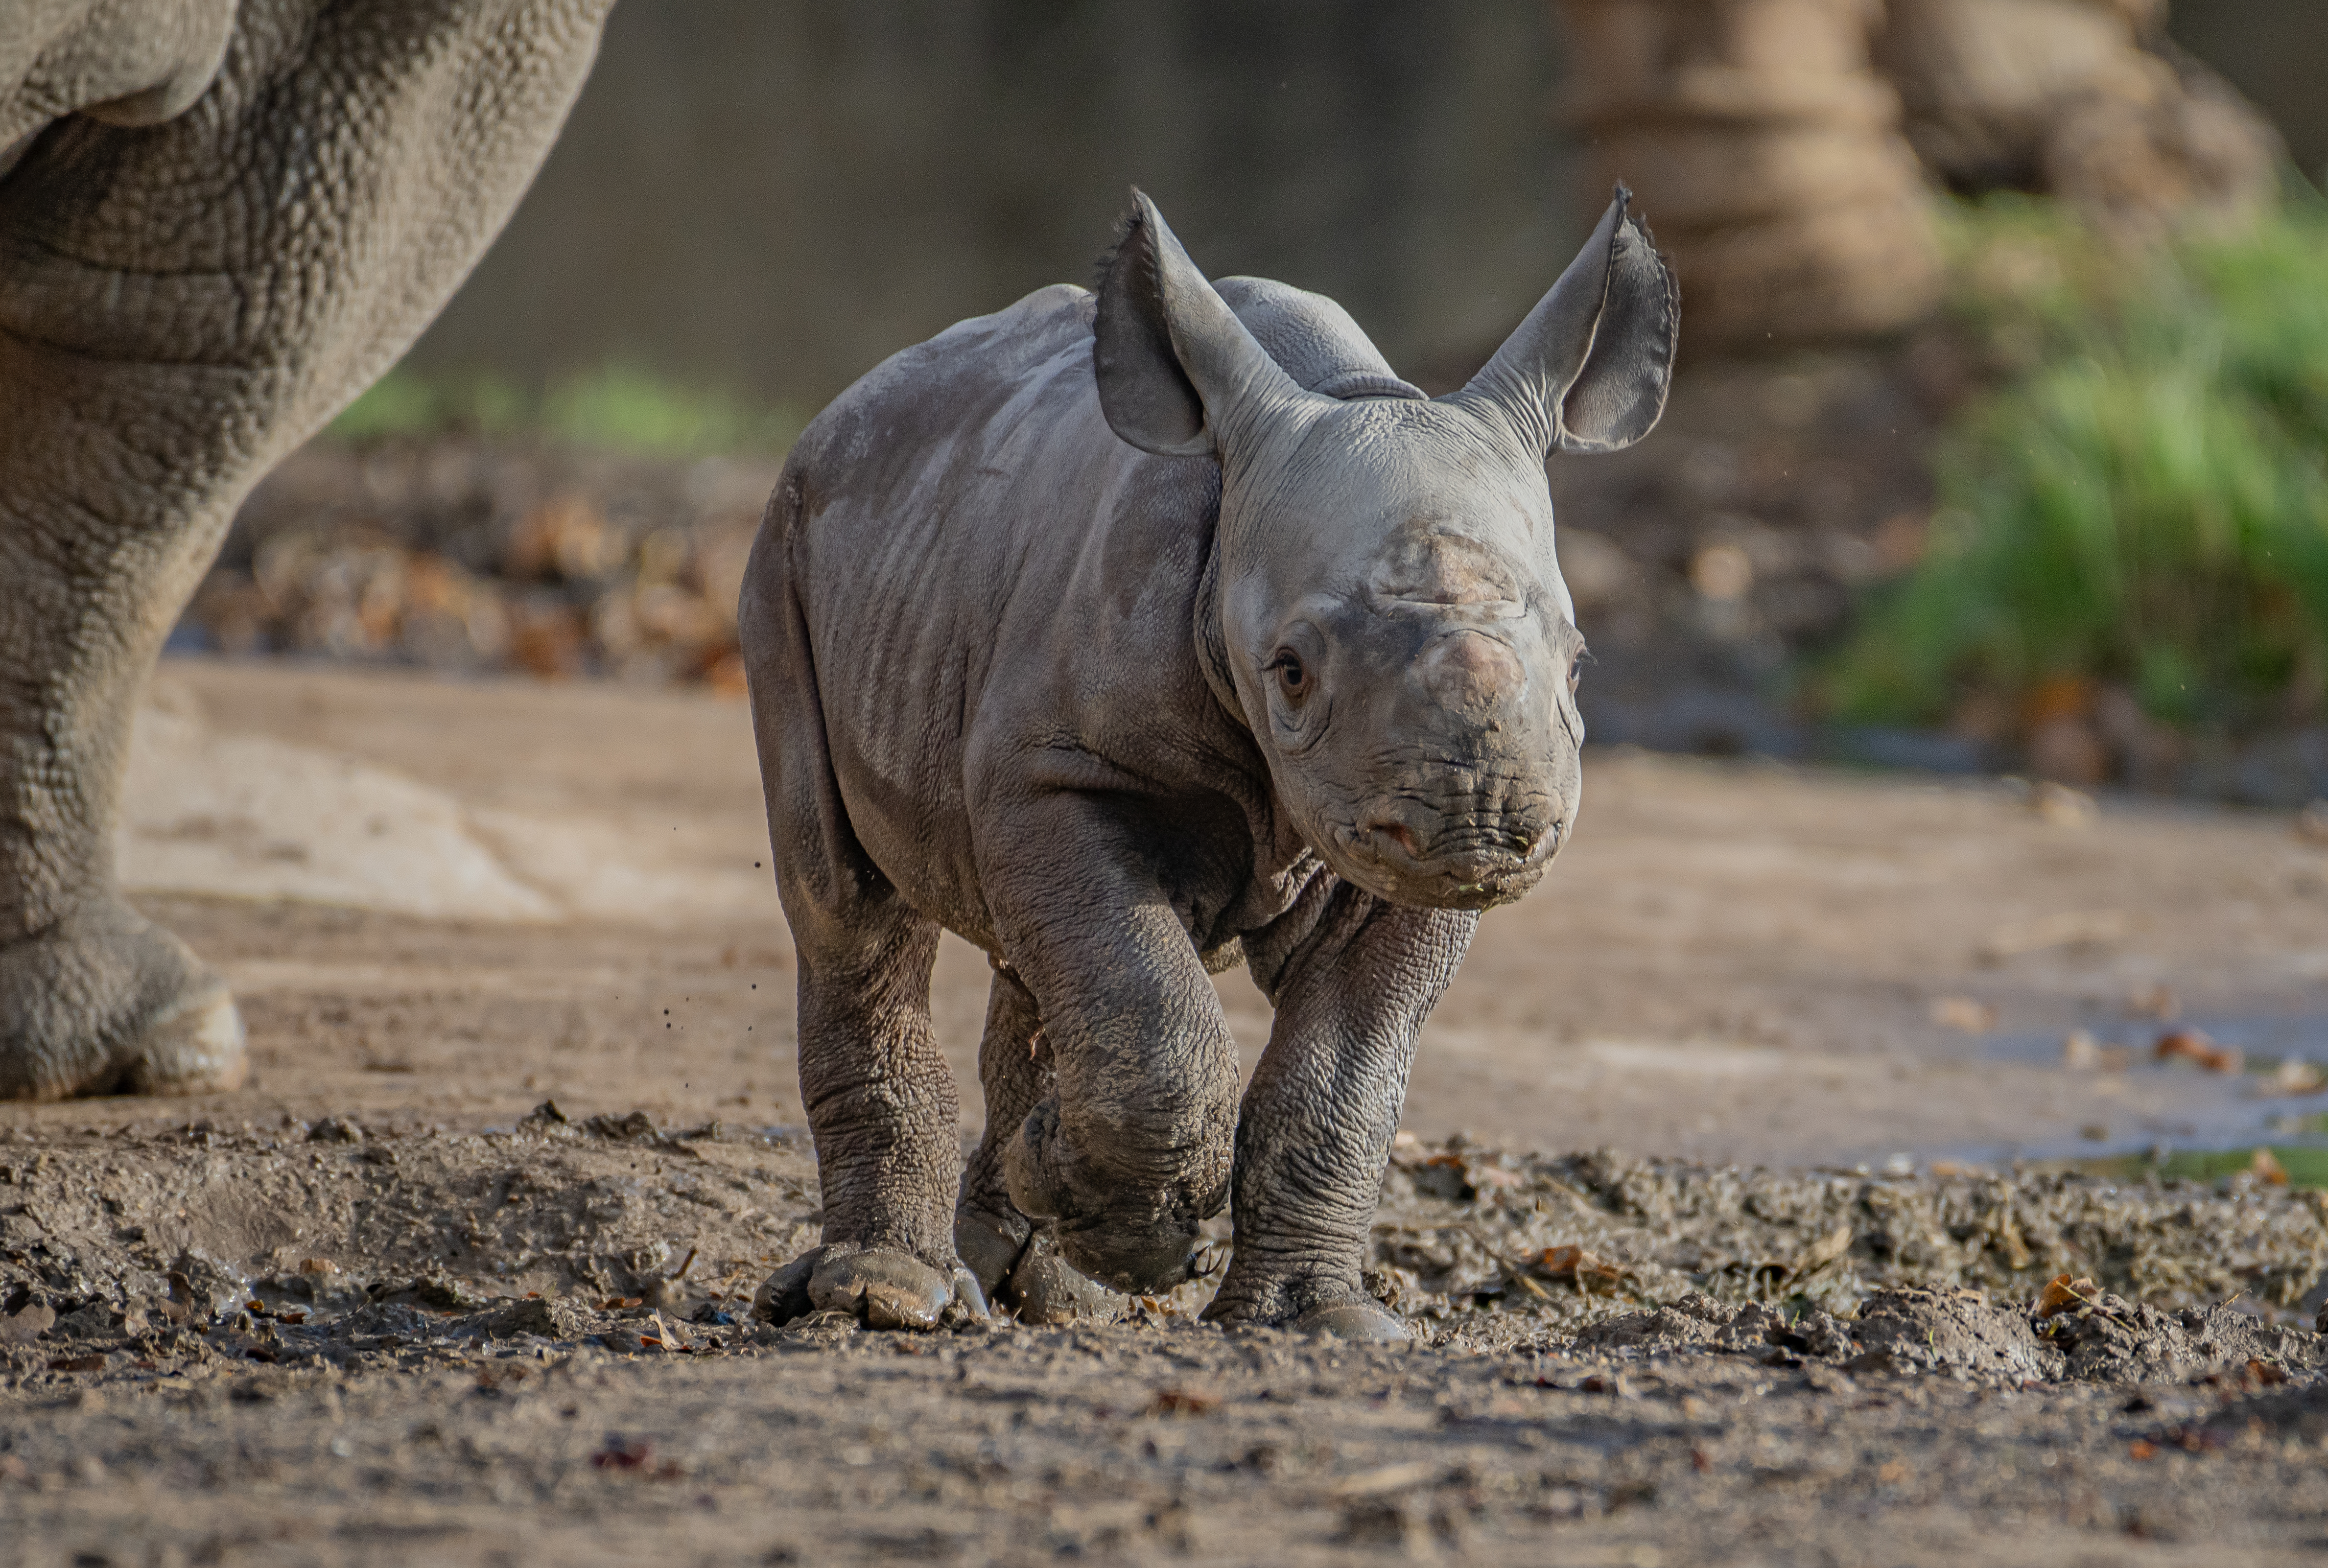 Small rhino calf with big ears explores outside on muddy ground